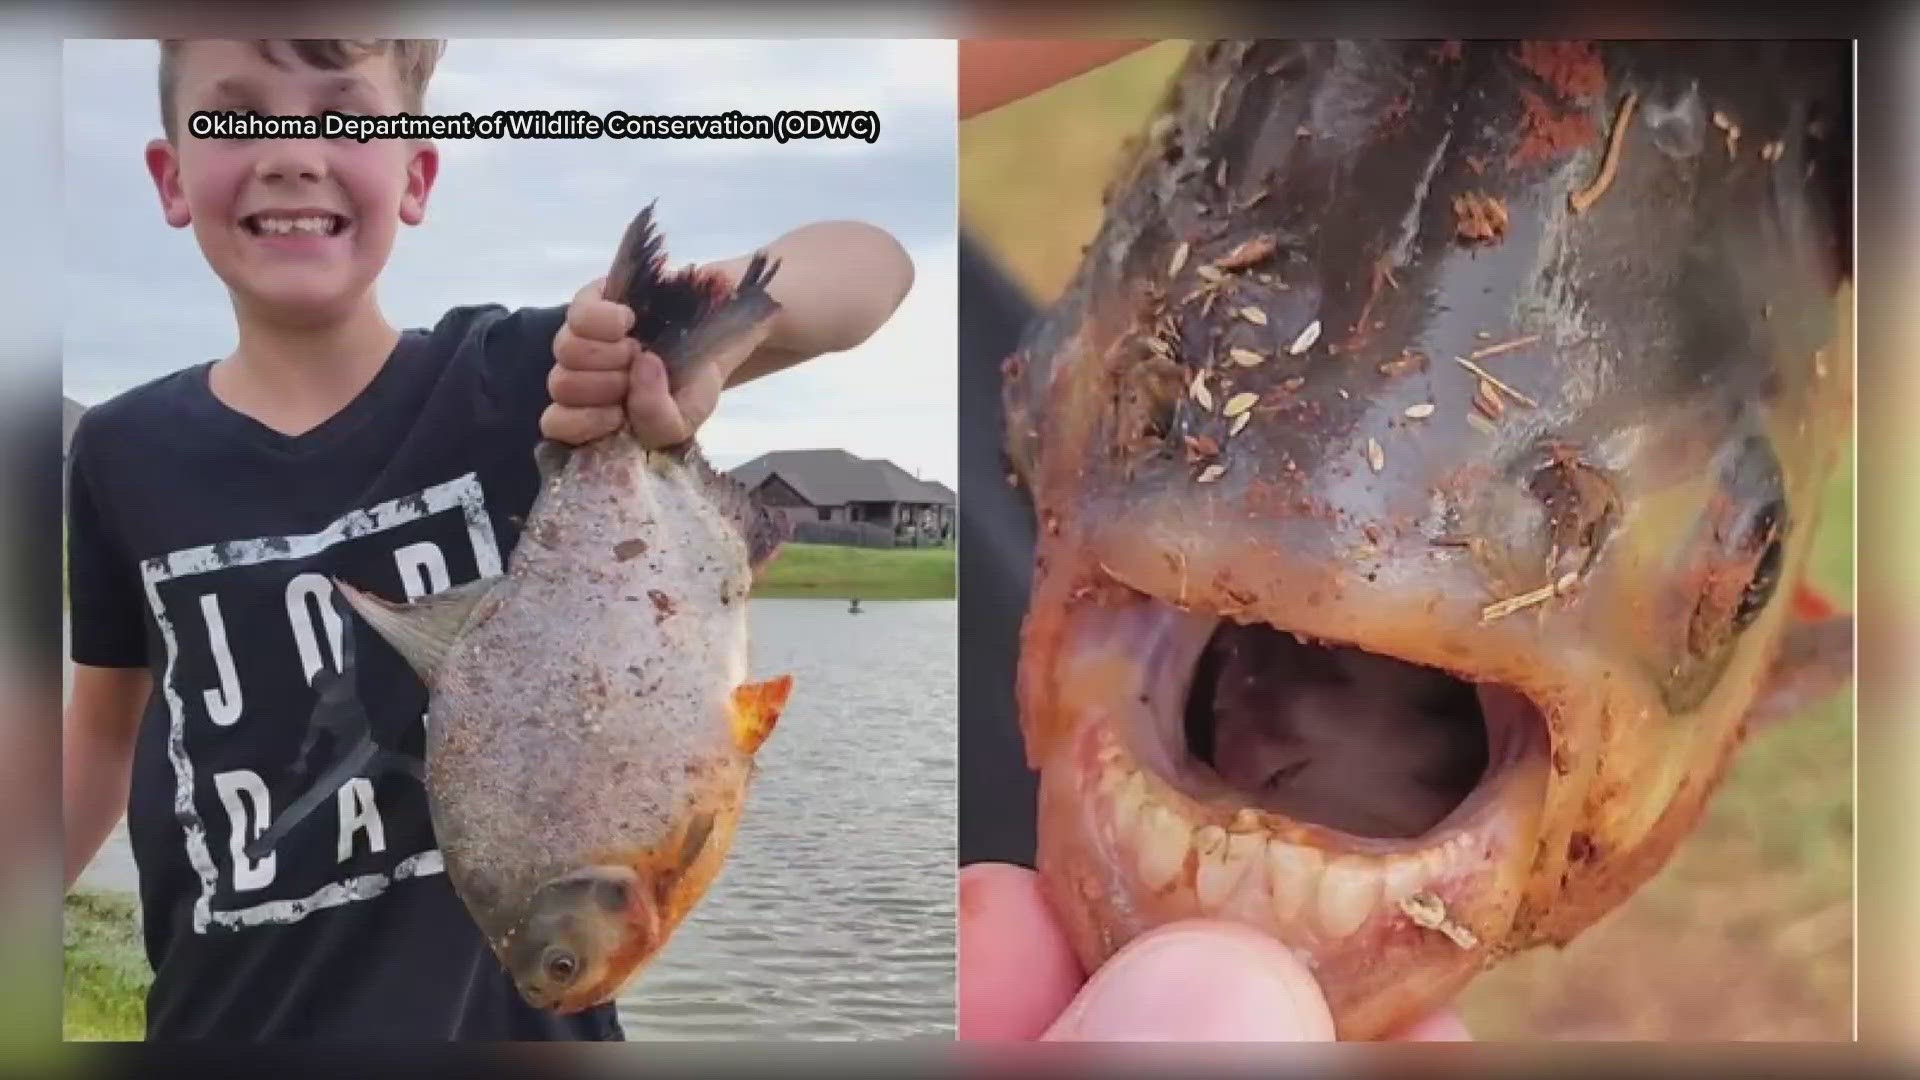 The Department of Wildlife Conservation says it's a Pacu fish.